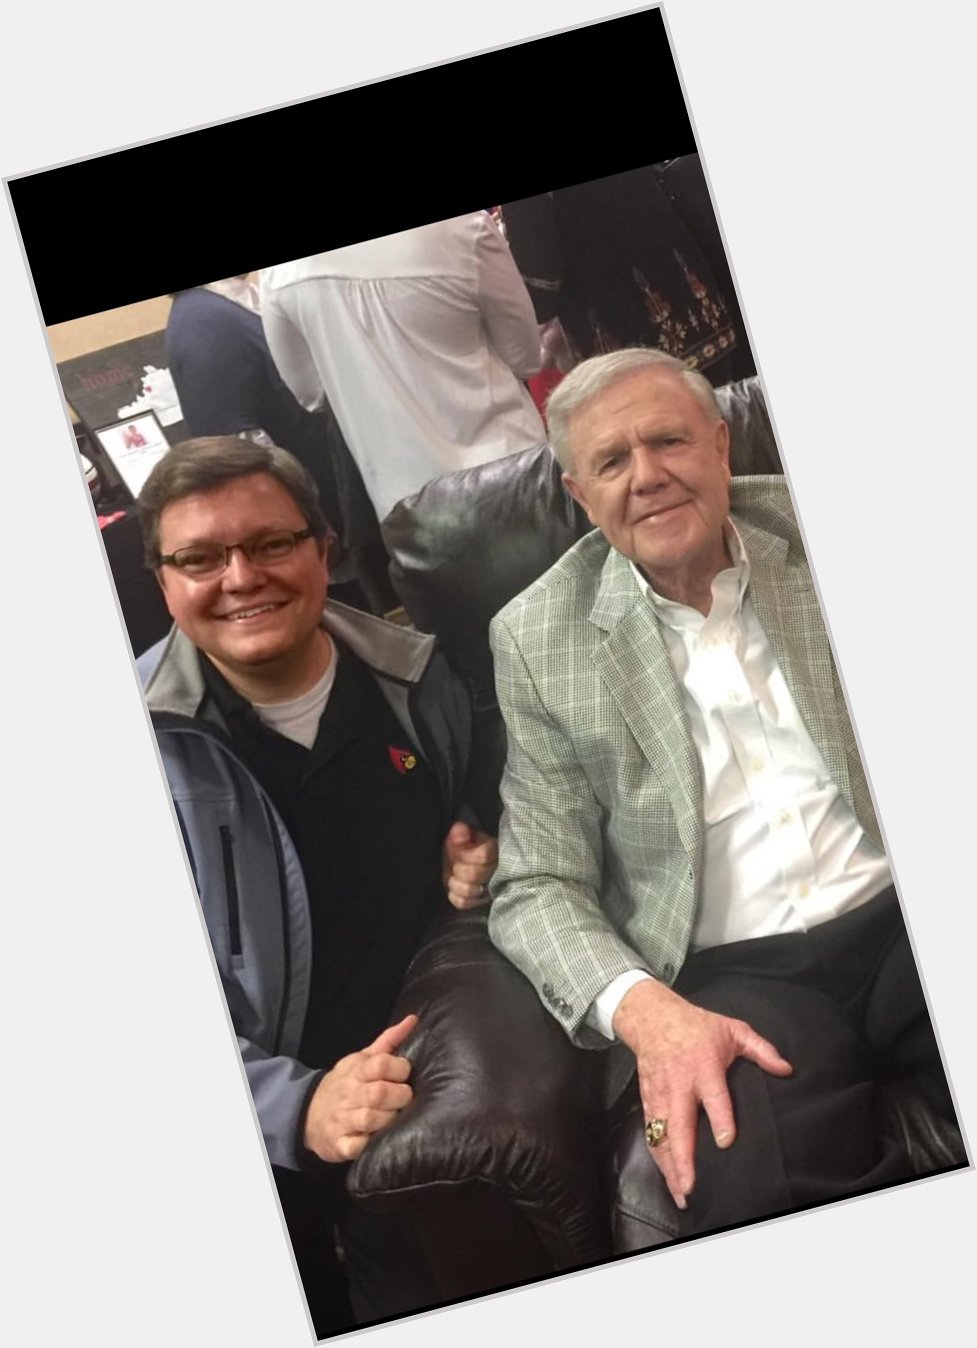 Coach Denny Crum our living legend. Happy 80th Birthday Coach. Thanks for all you\ve done and continue to do. 